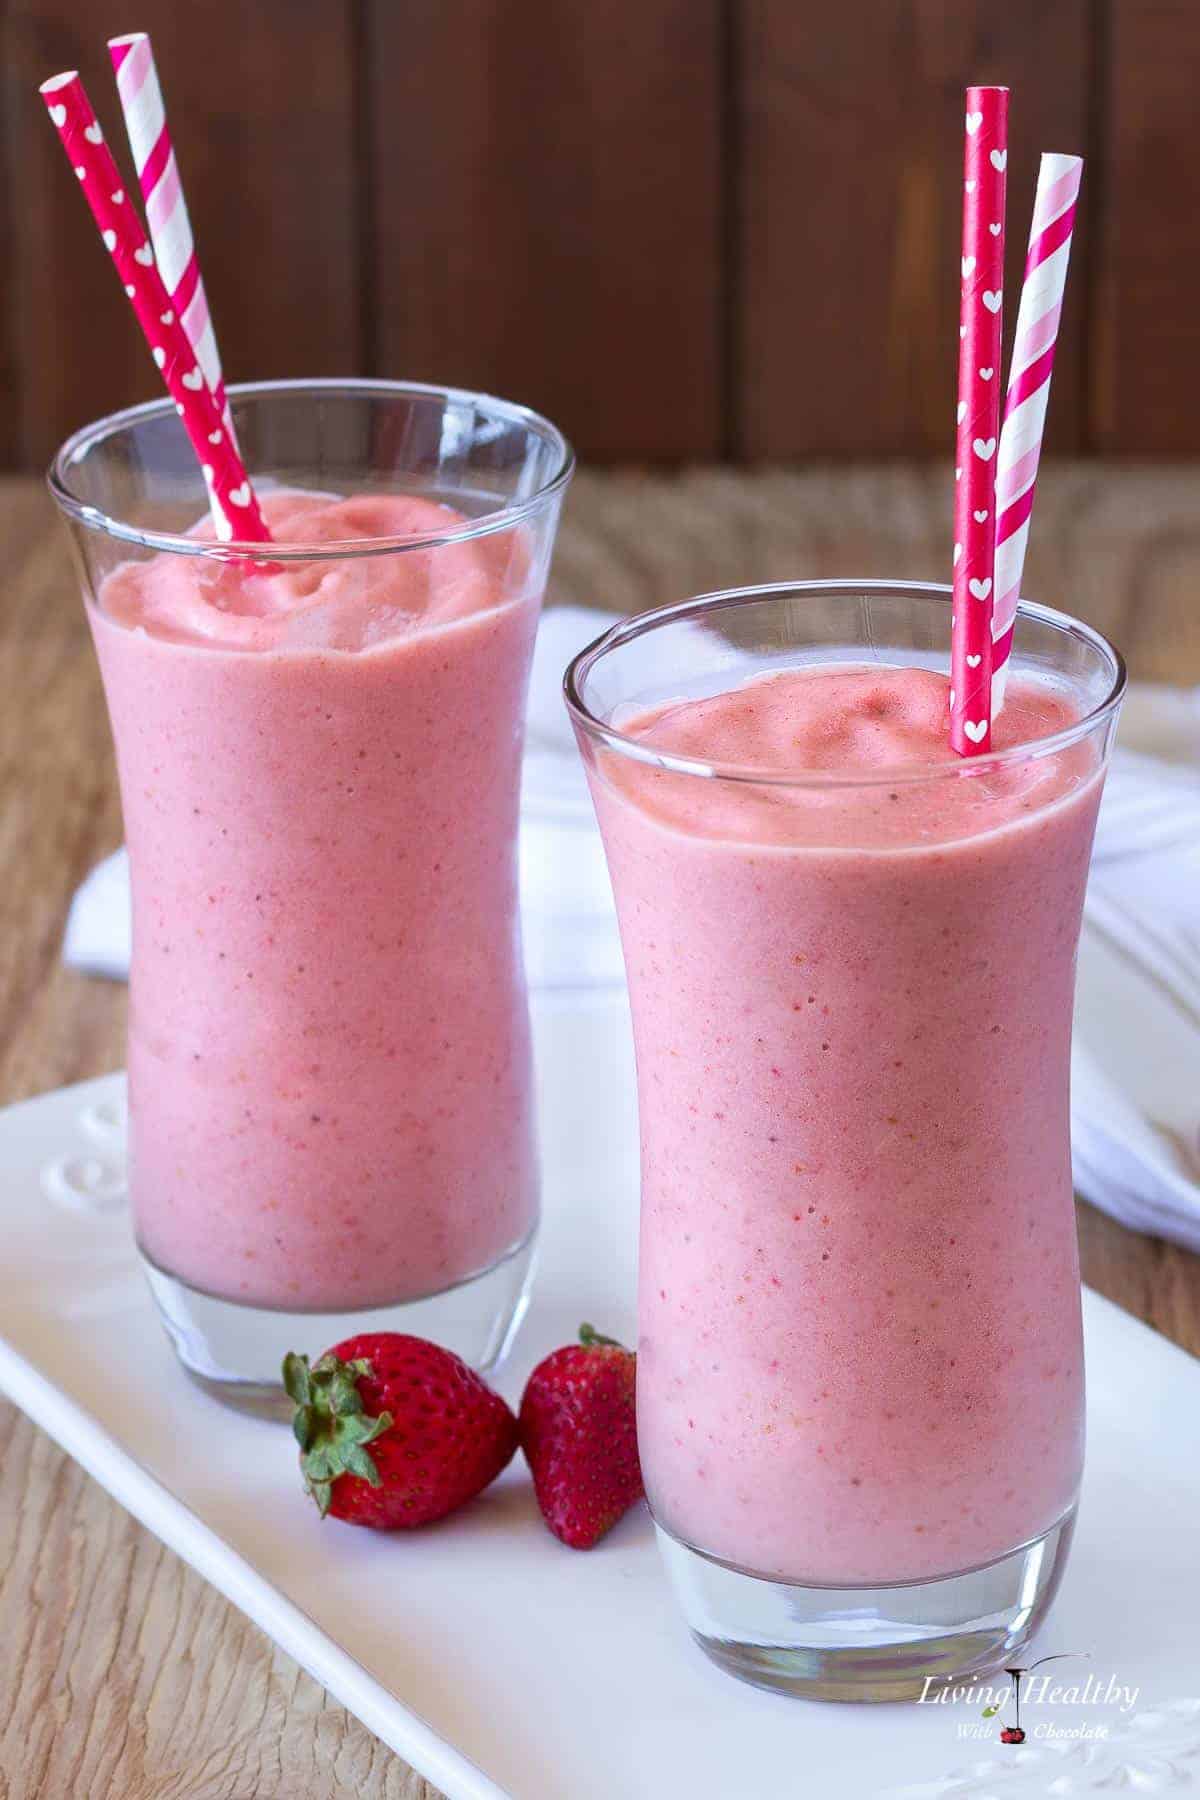 two glasses of dairy free paleo strawberry milkshakes served on white glass tray with a few loose strawberries